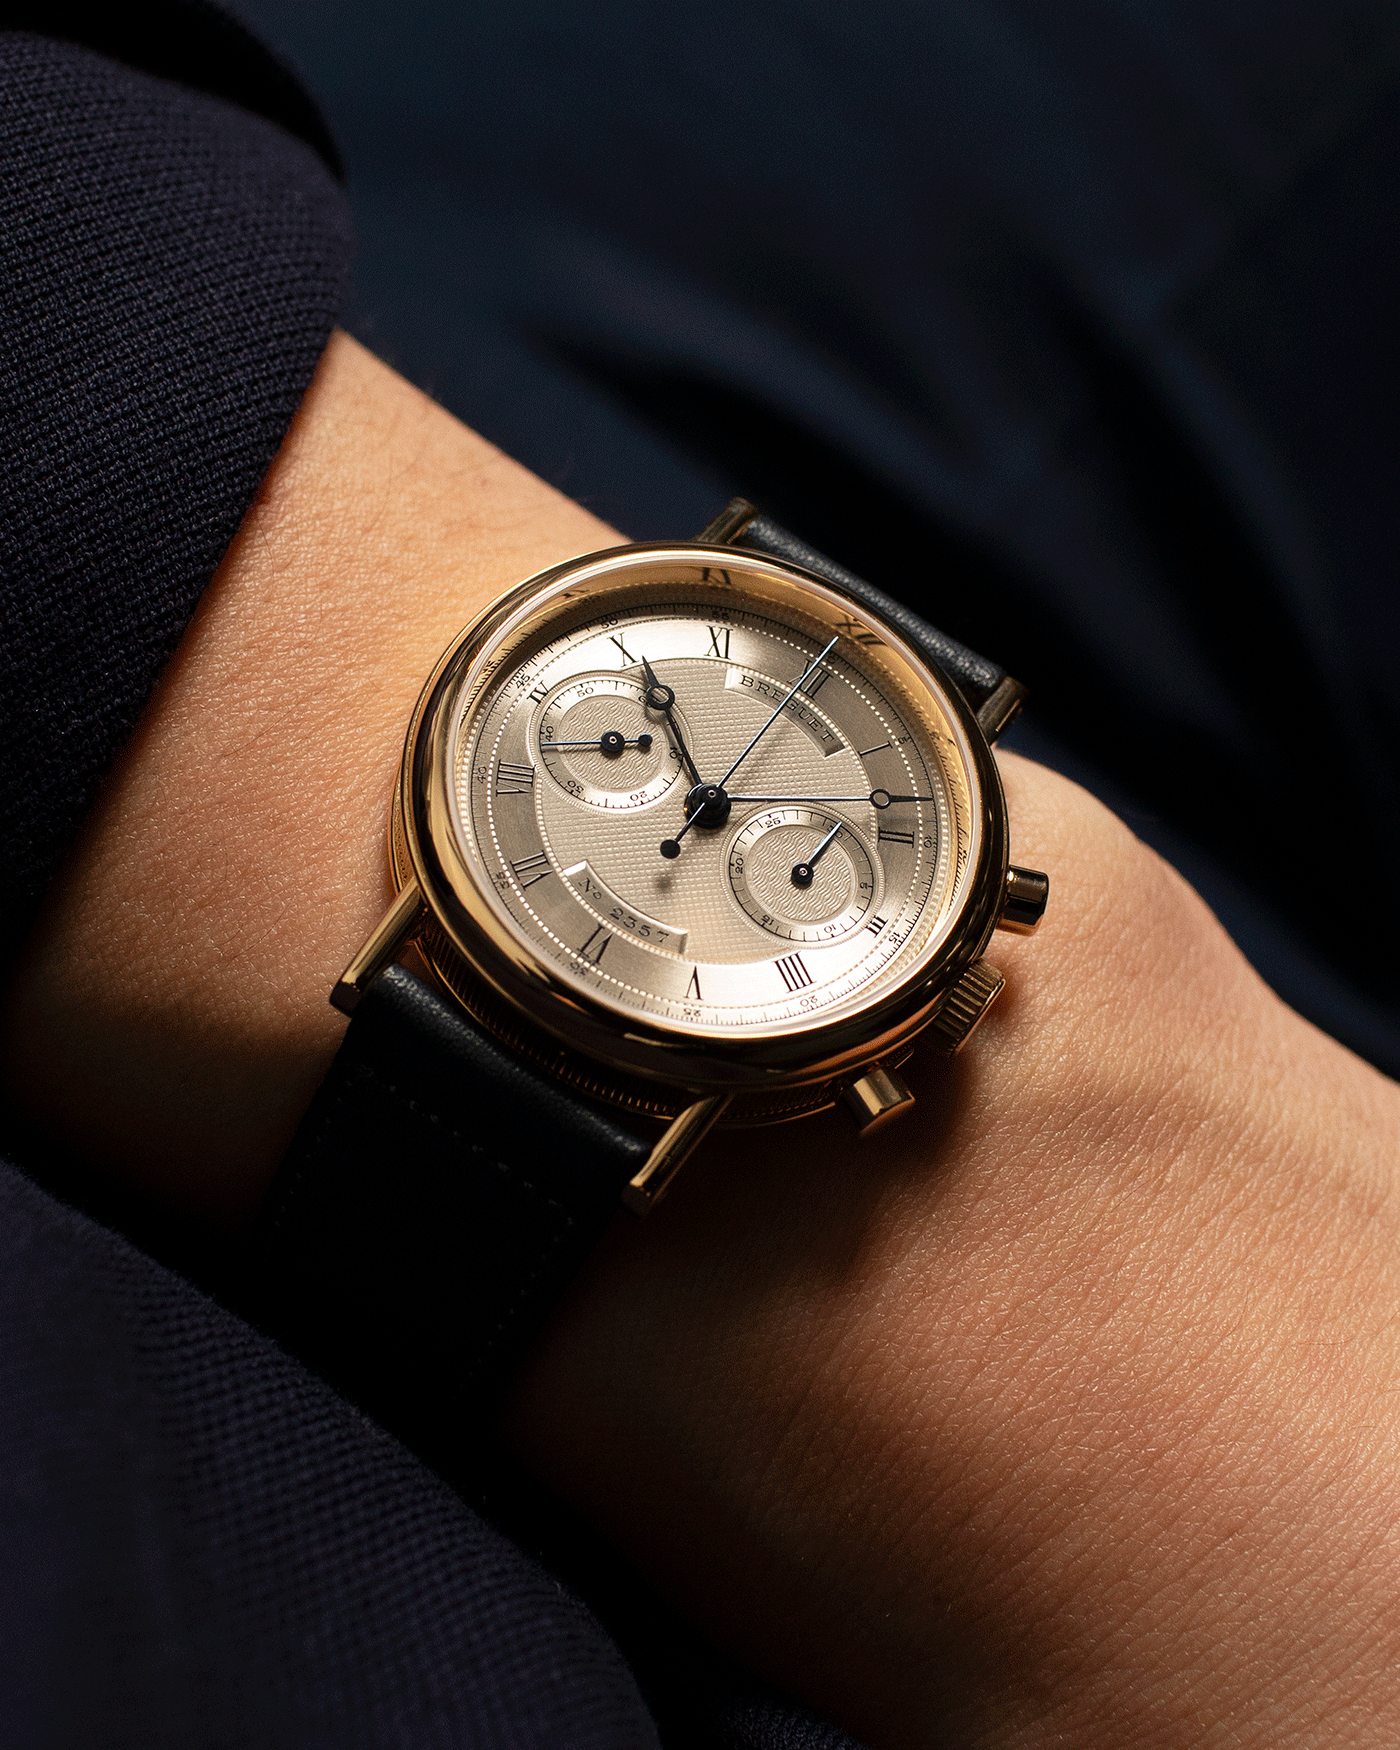 Brand: Breguet Year: 1990’s Model: 3237 Material: 18k Yellow Gold Movement: Lemania 2310 Case Diameter: 36mm Strap: Accurate Form Navy Blue Calf